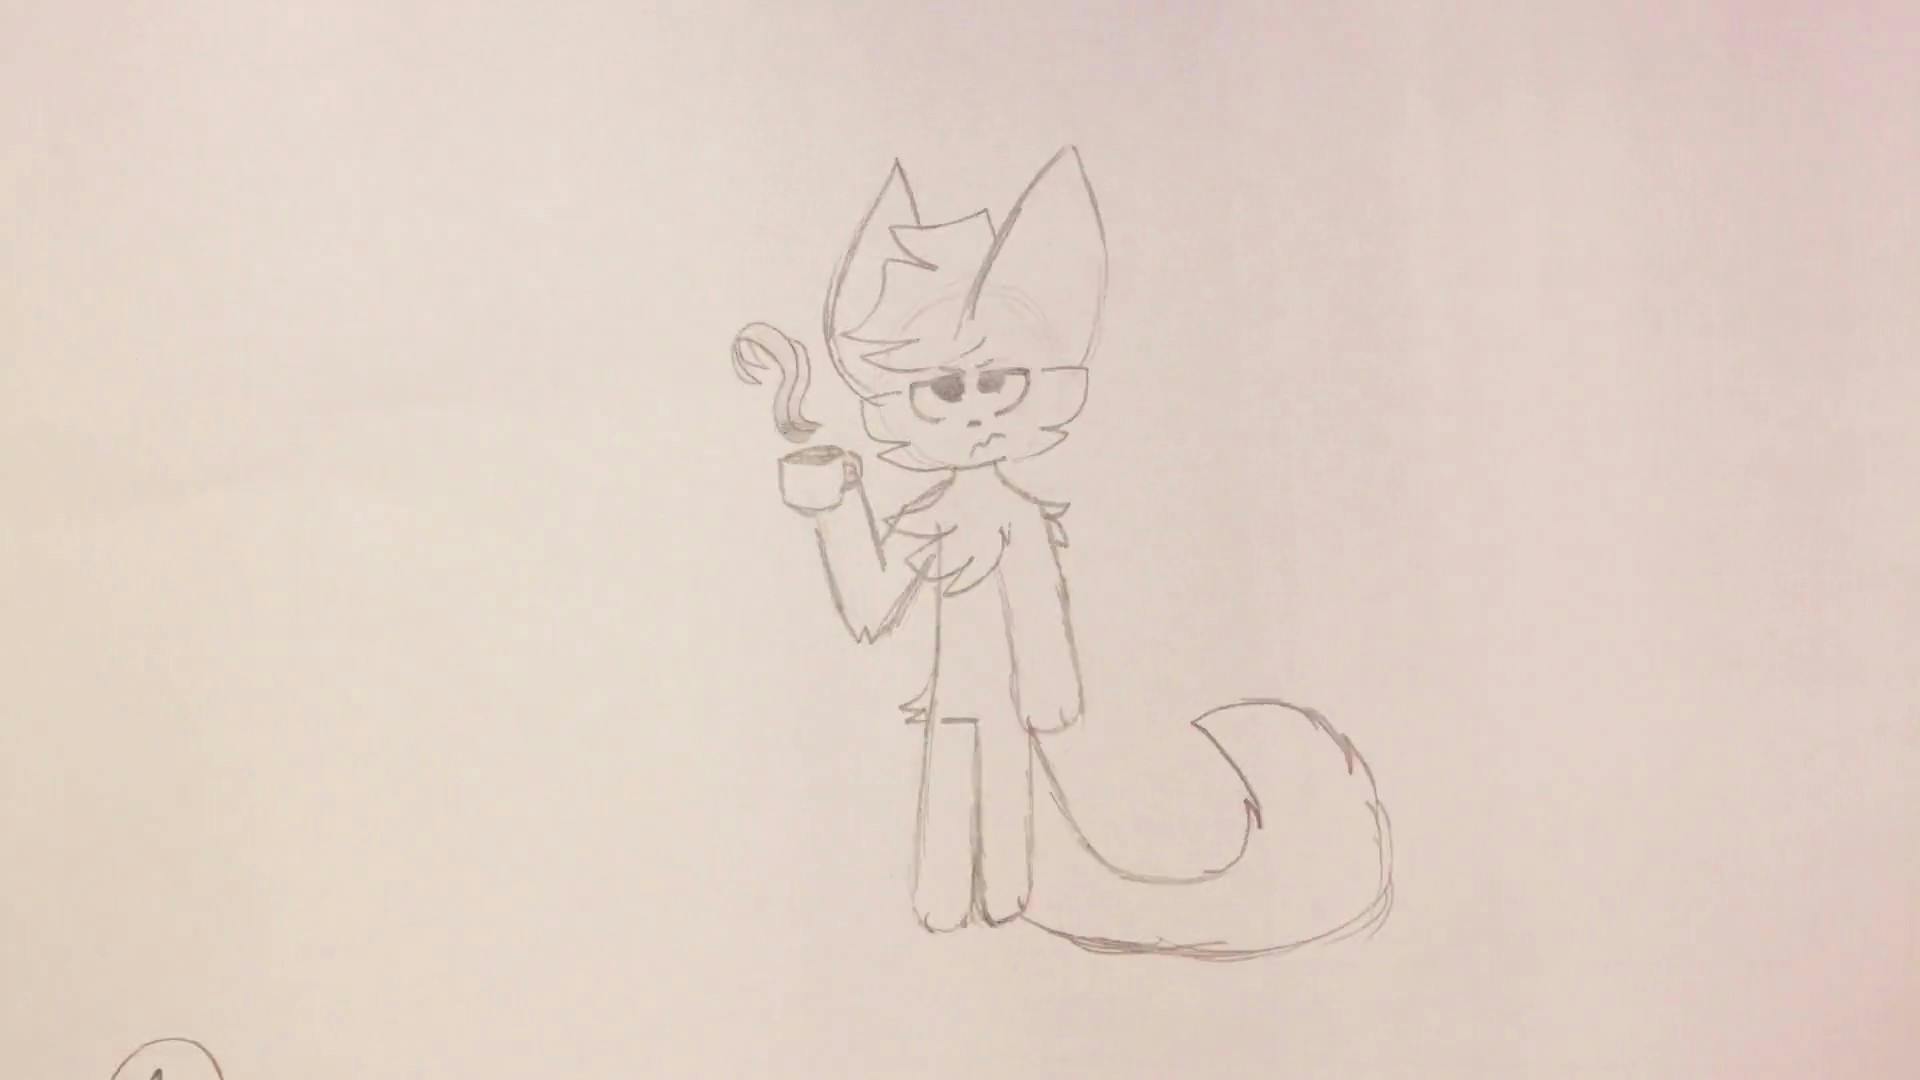 drawing of a cat character who looks grumpy, holding a cup of coffee